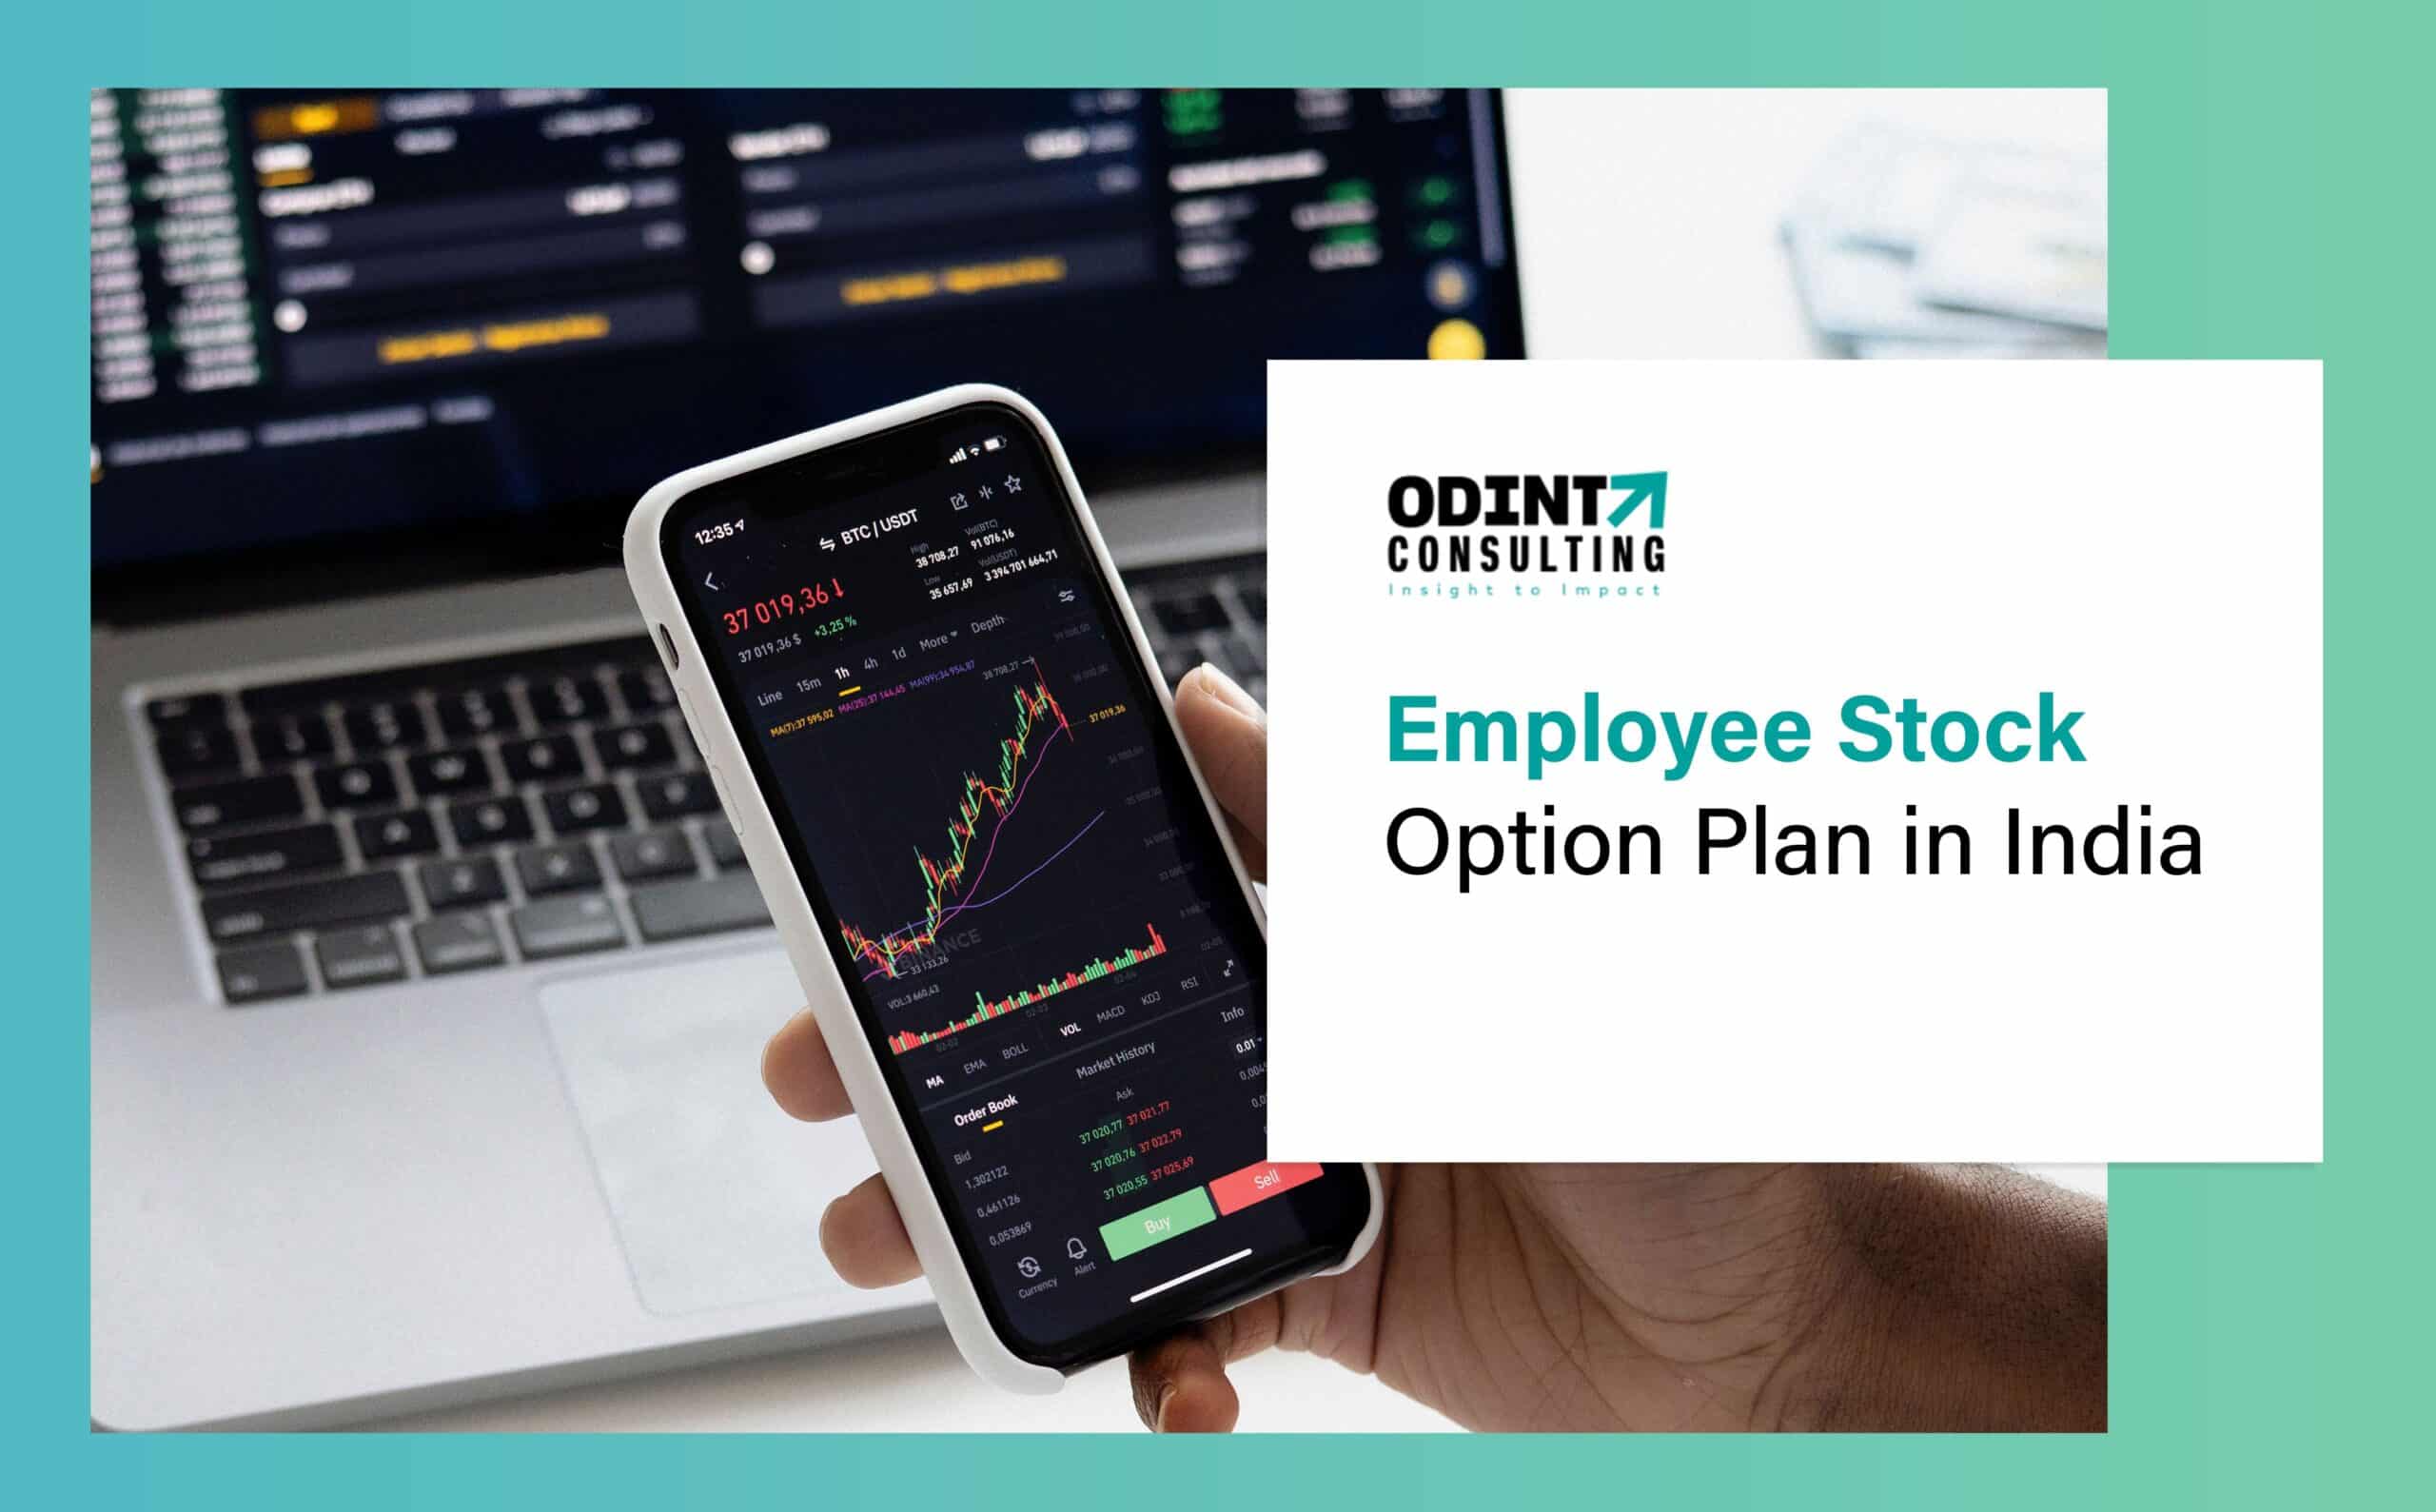 Employee Stock Option Plan in India 2022: Advantages, Requirements & Procedure